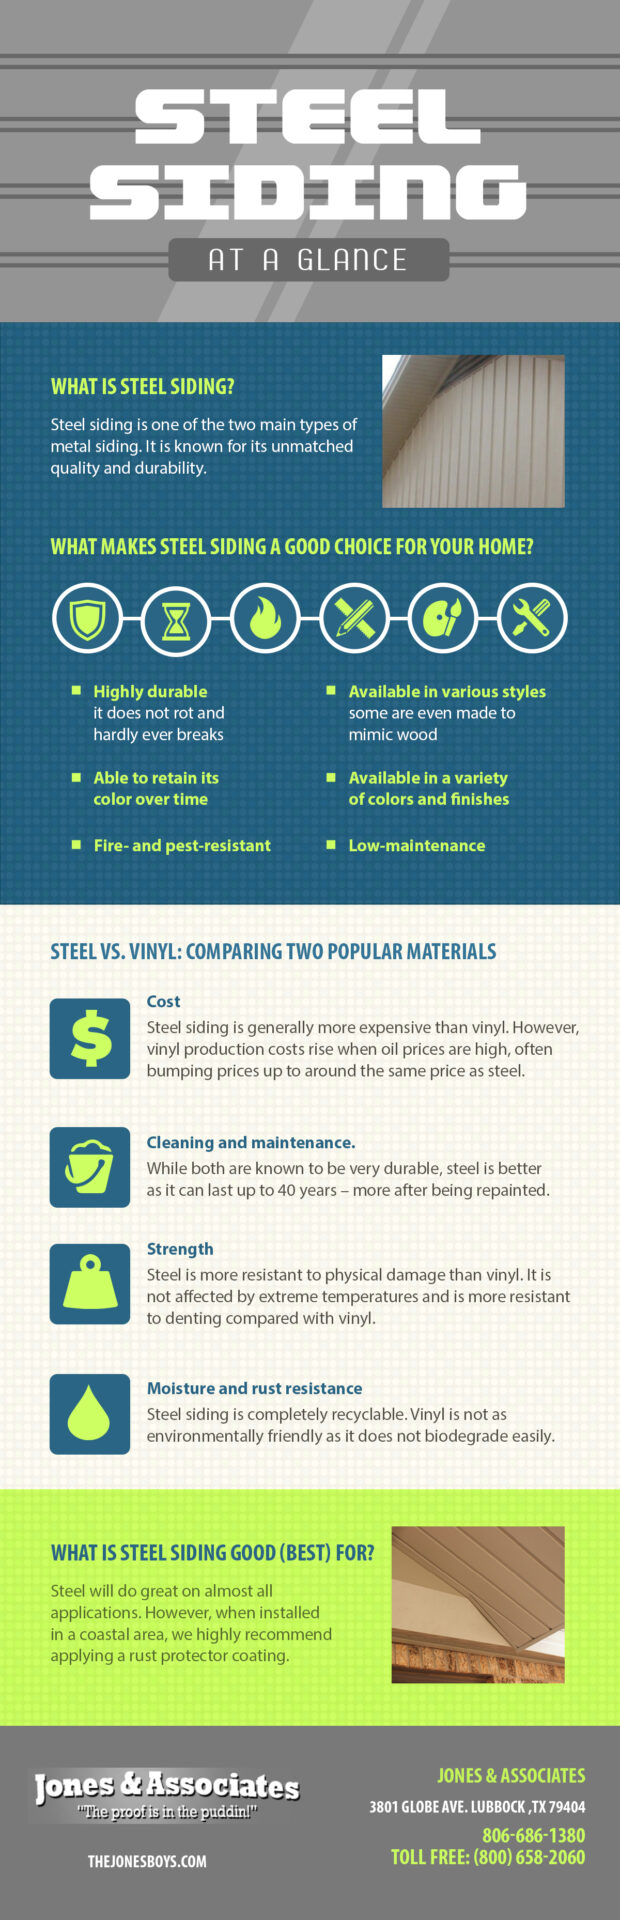 Infographic - Steel Siding at a Glance